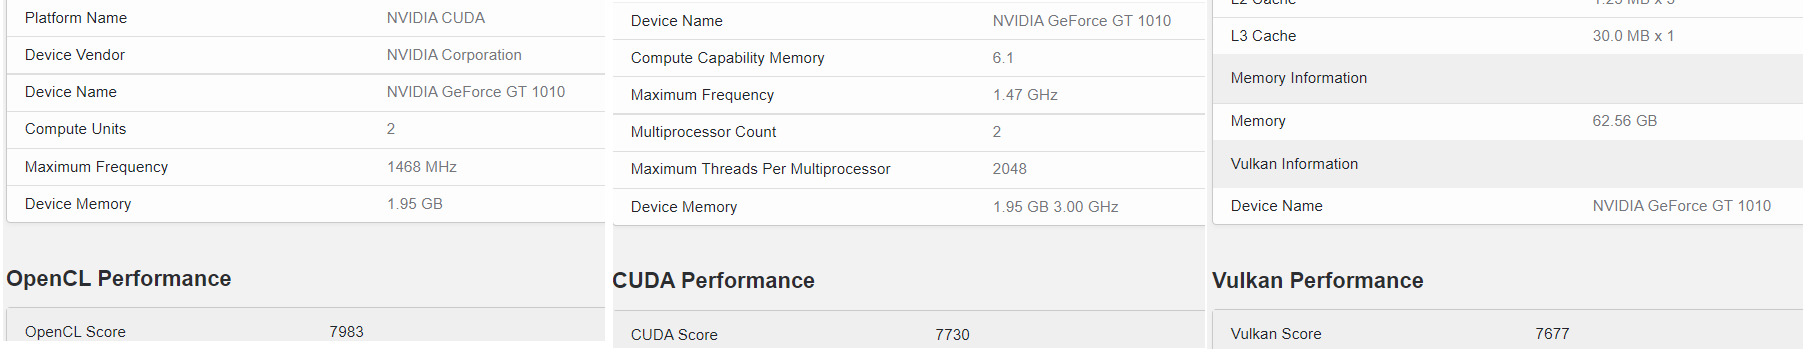 NVIDIA-GT-1030-Performance.png